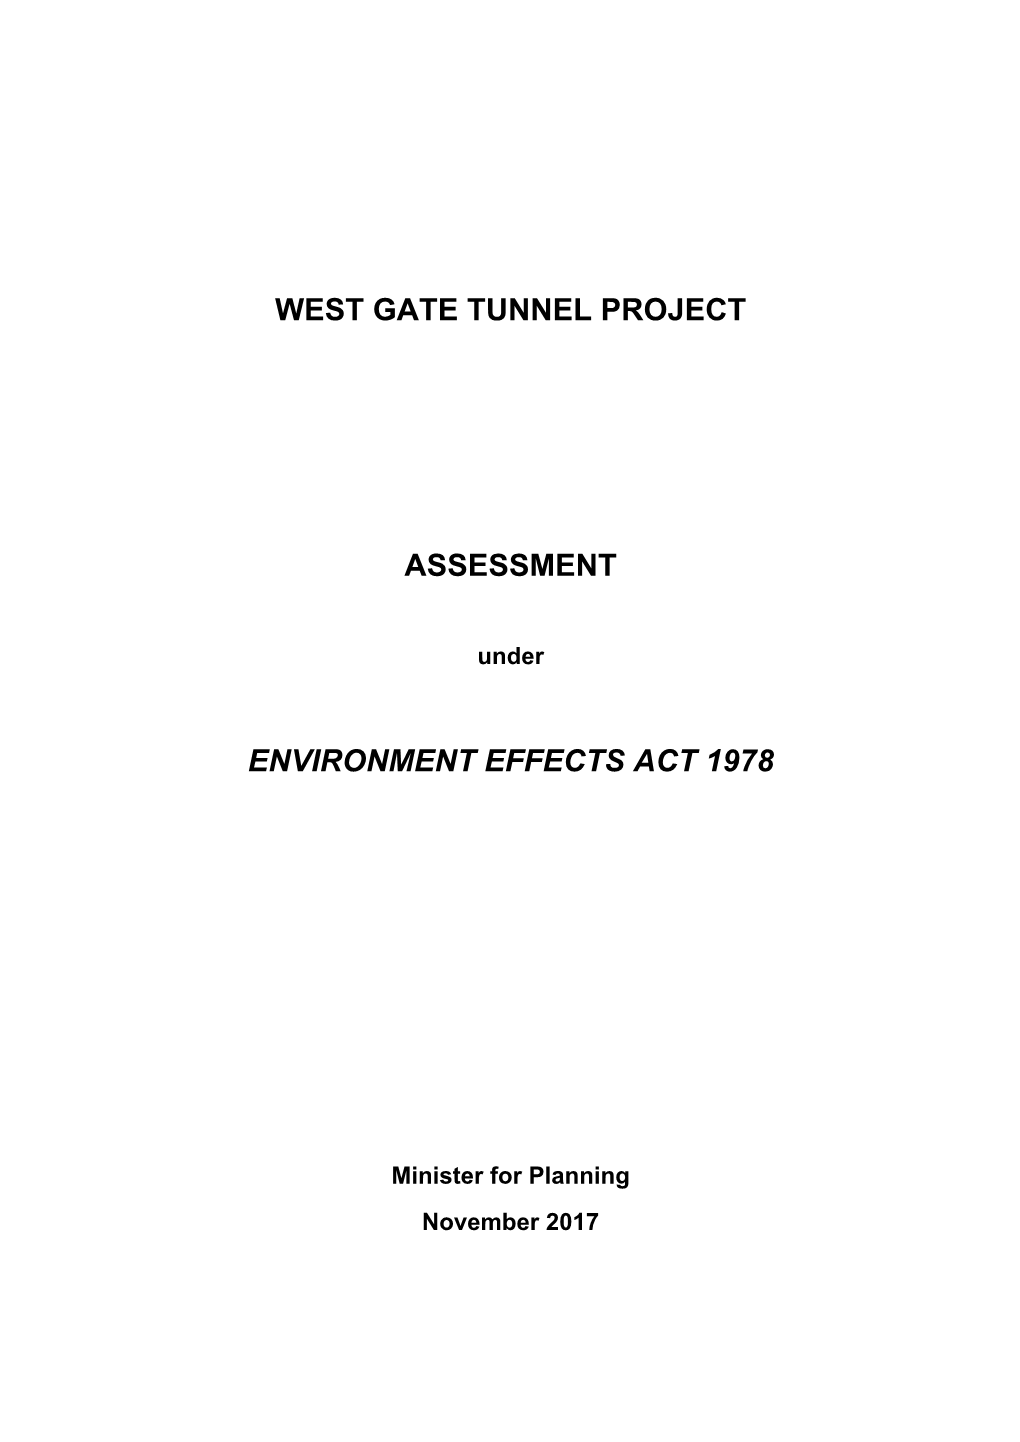 West Gate Tunnel Project Assessment